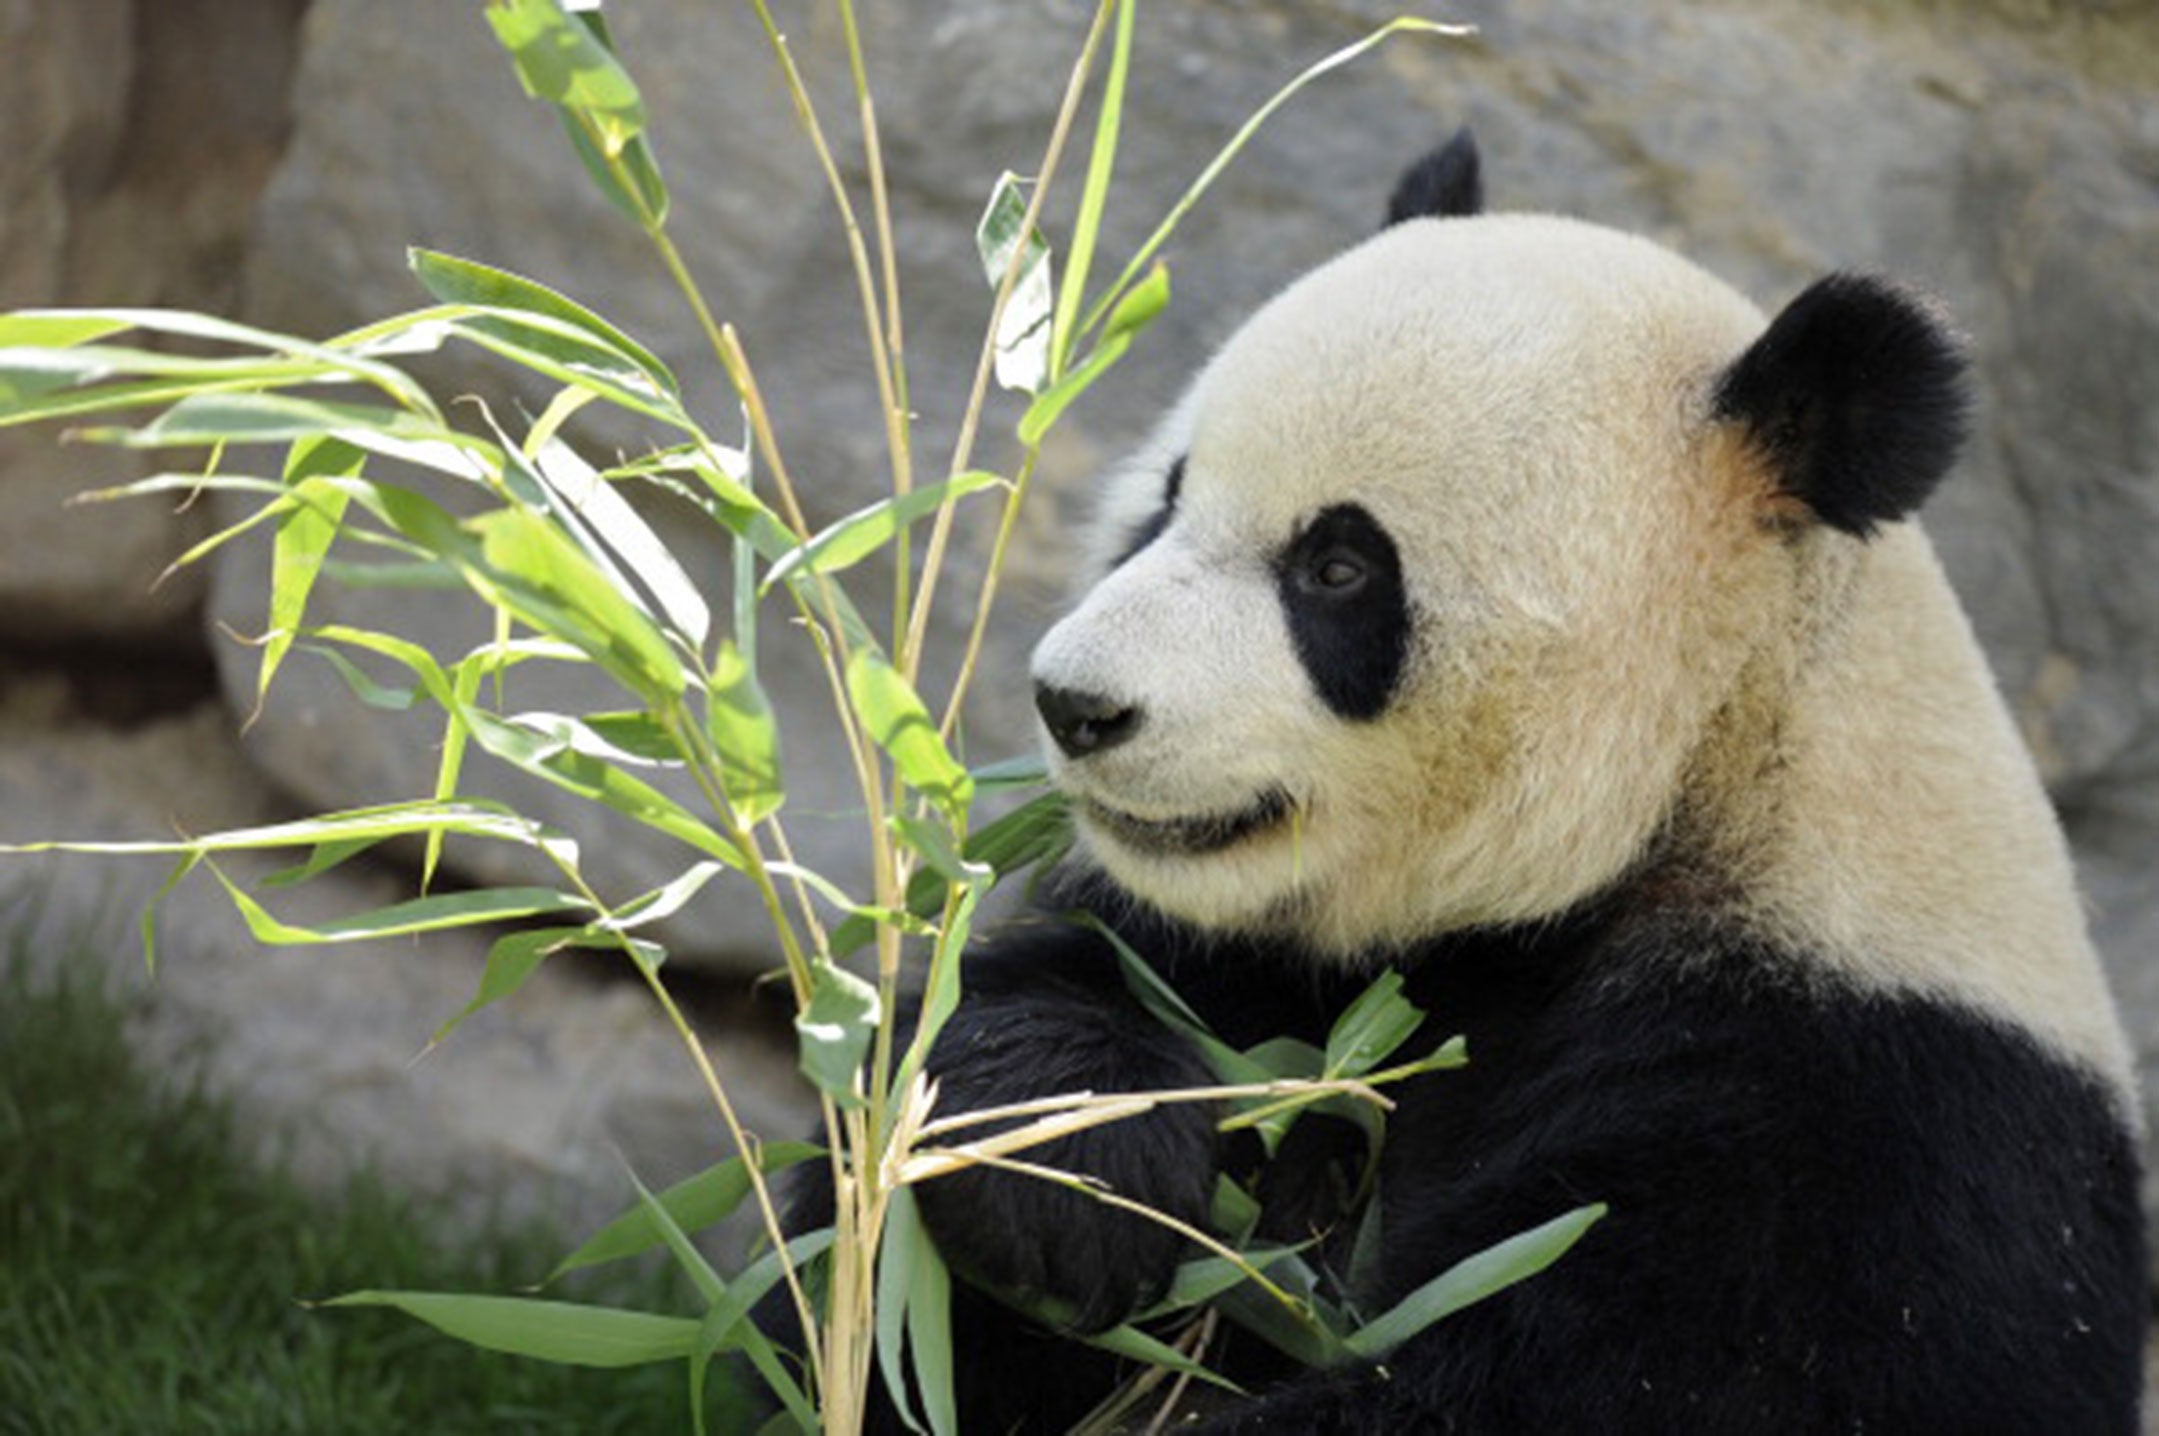 Pandas are notoriously bad breeders